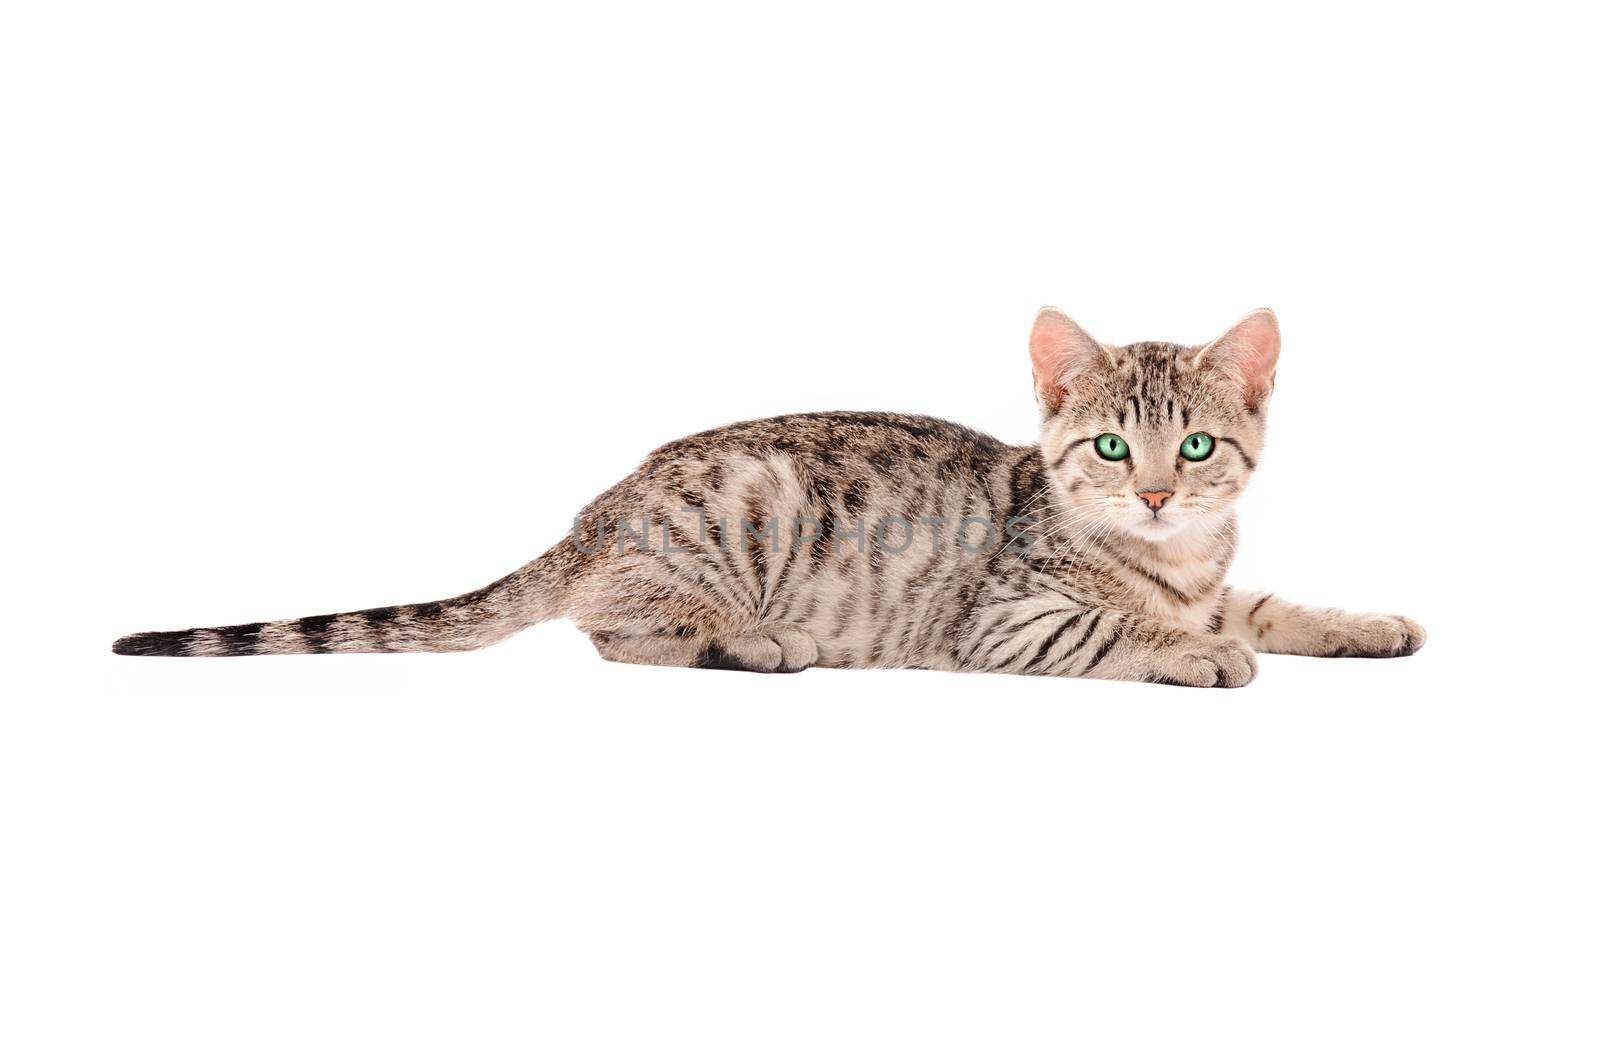 A Tabby Kitten on White by dnsphotography